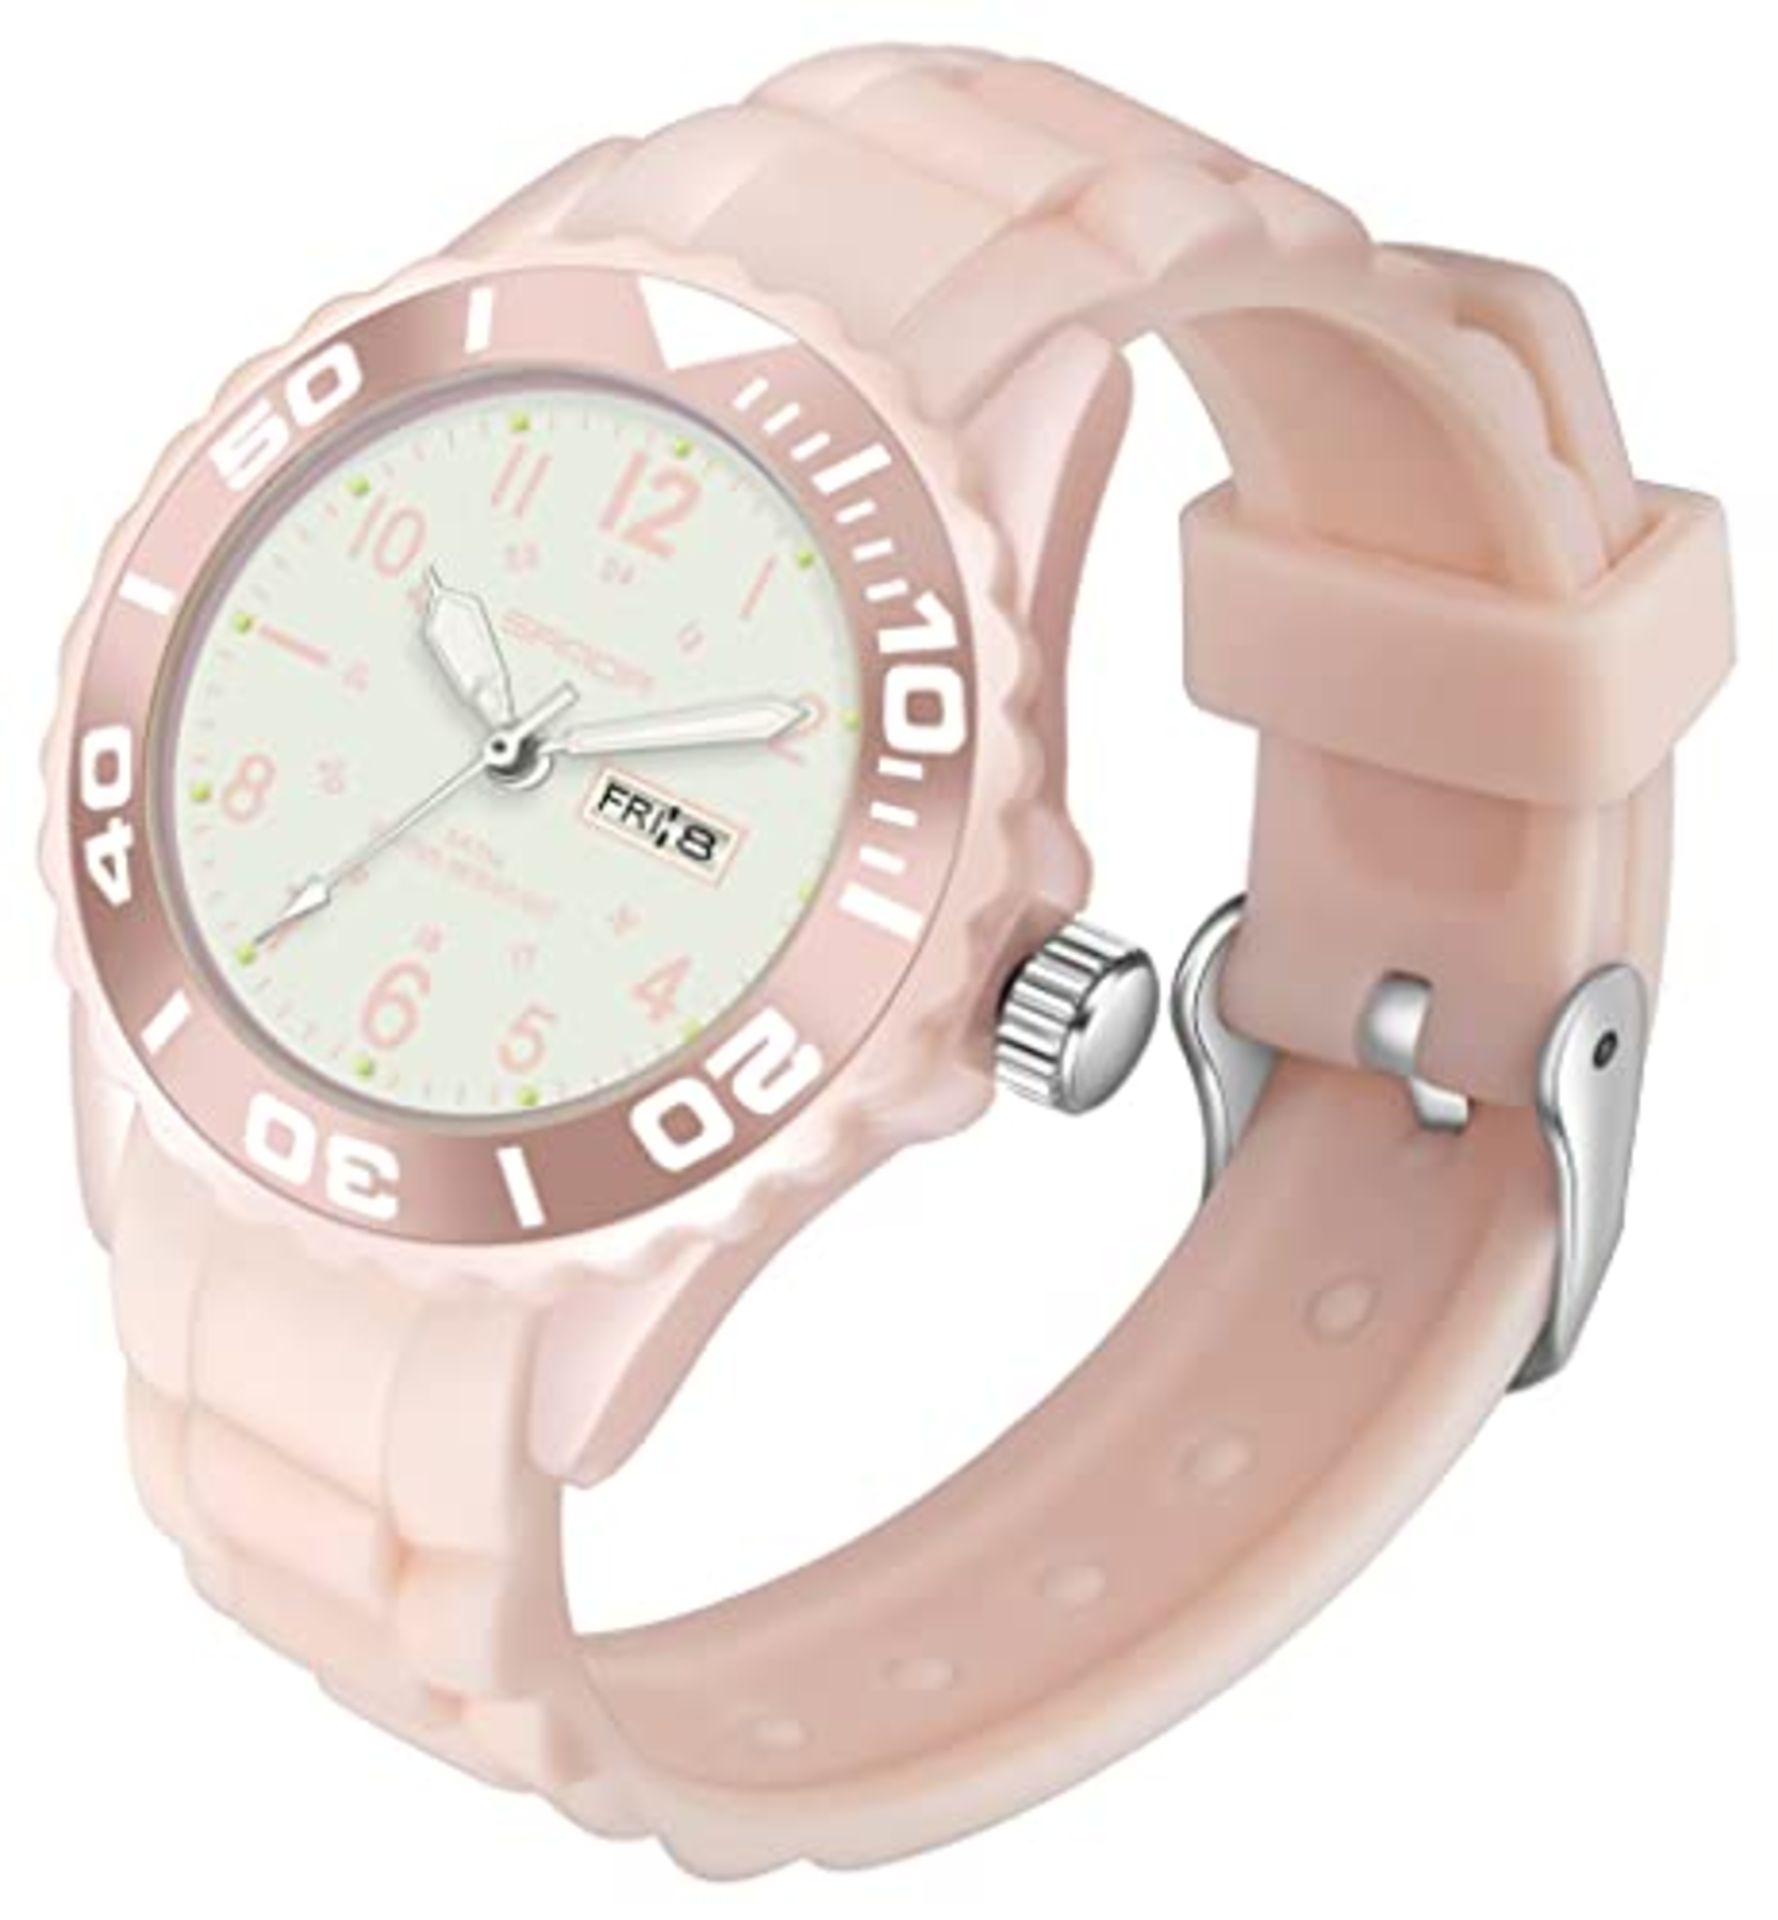 RRP £21.67 findtime Womens Analogue Watches Waterproof Sport Watch